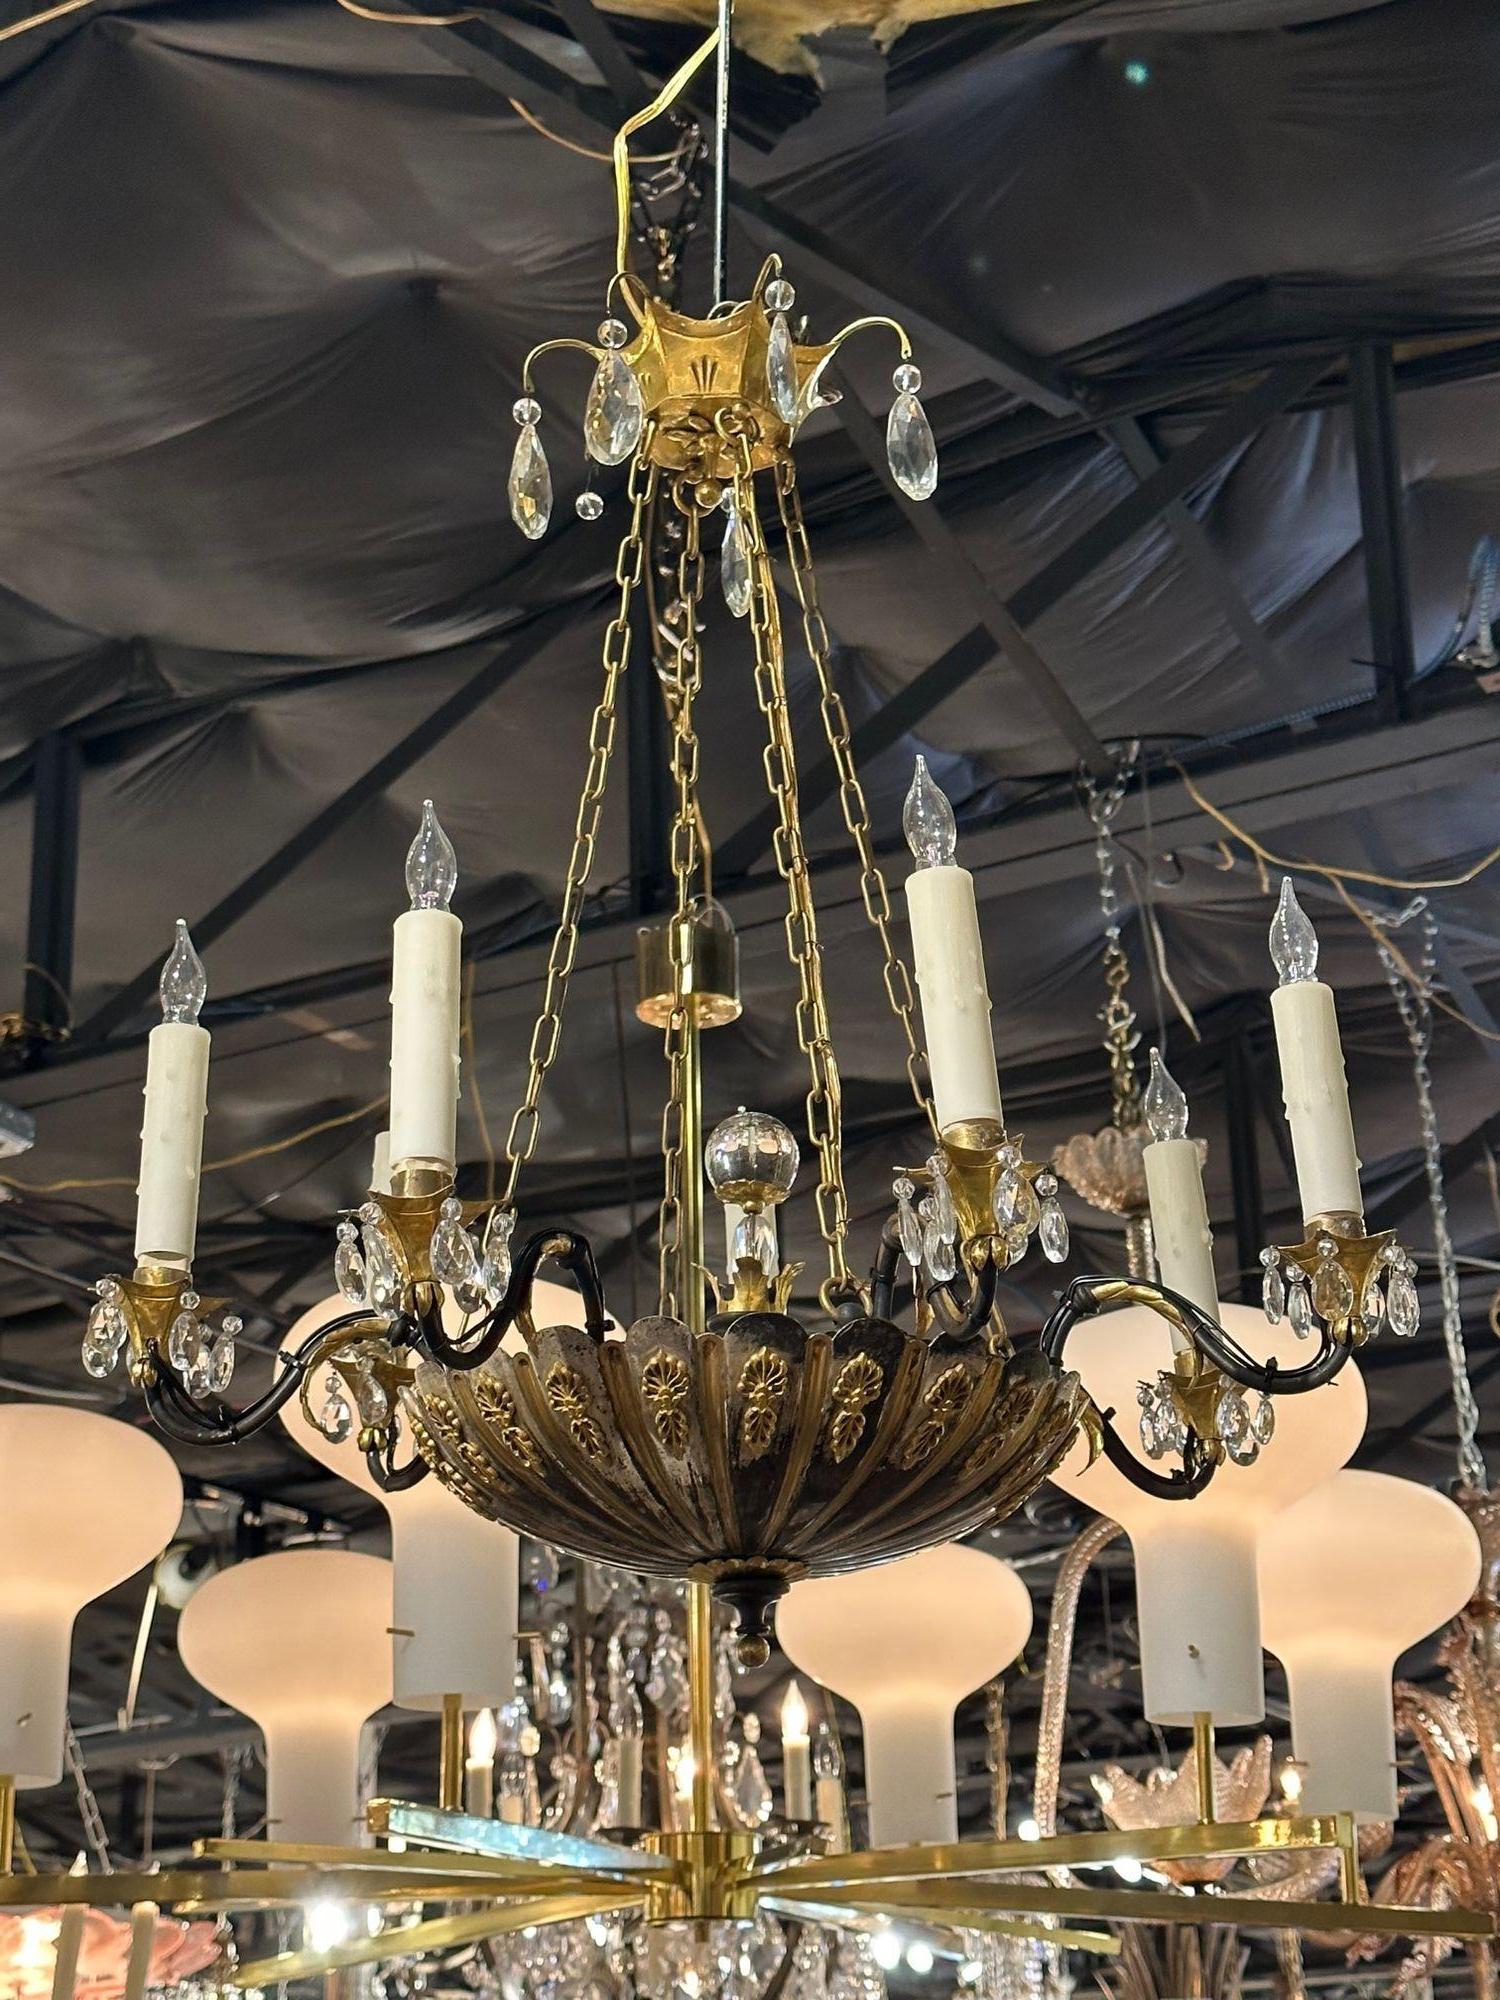 19th century English silver and bronze chandelier. Circa 1880. The chandelier has been professionally rewired, comes with matching chain and canopy. It is ready to hang!